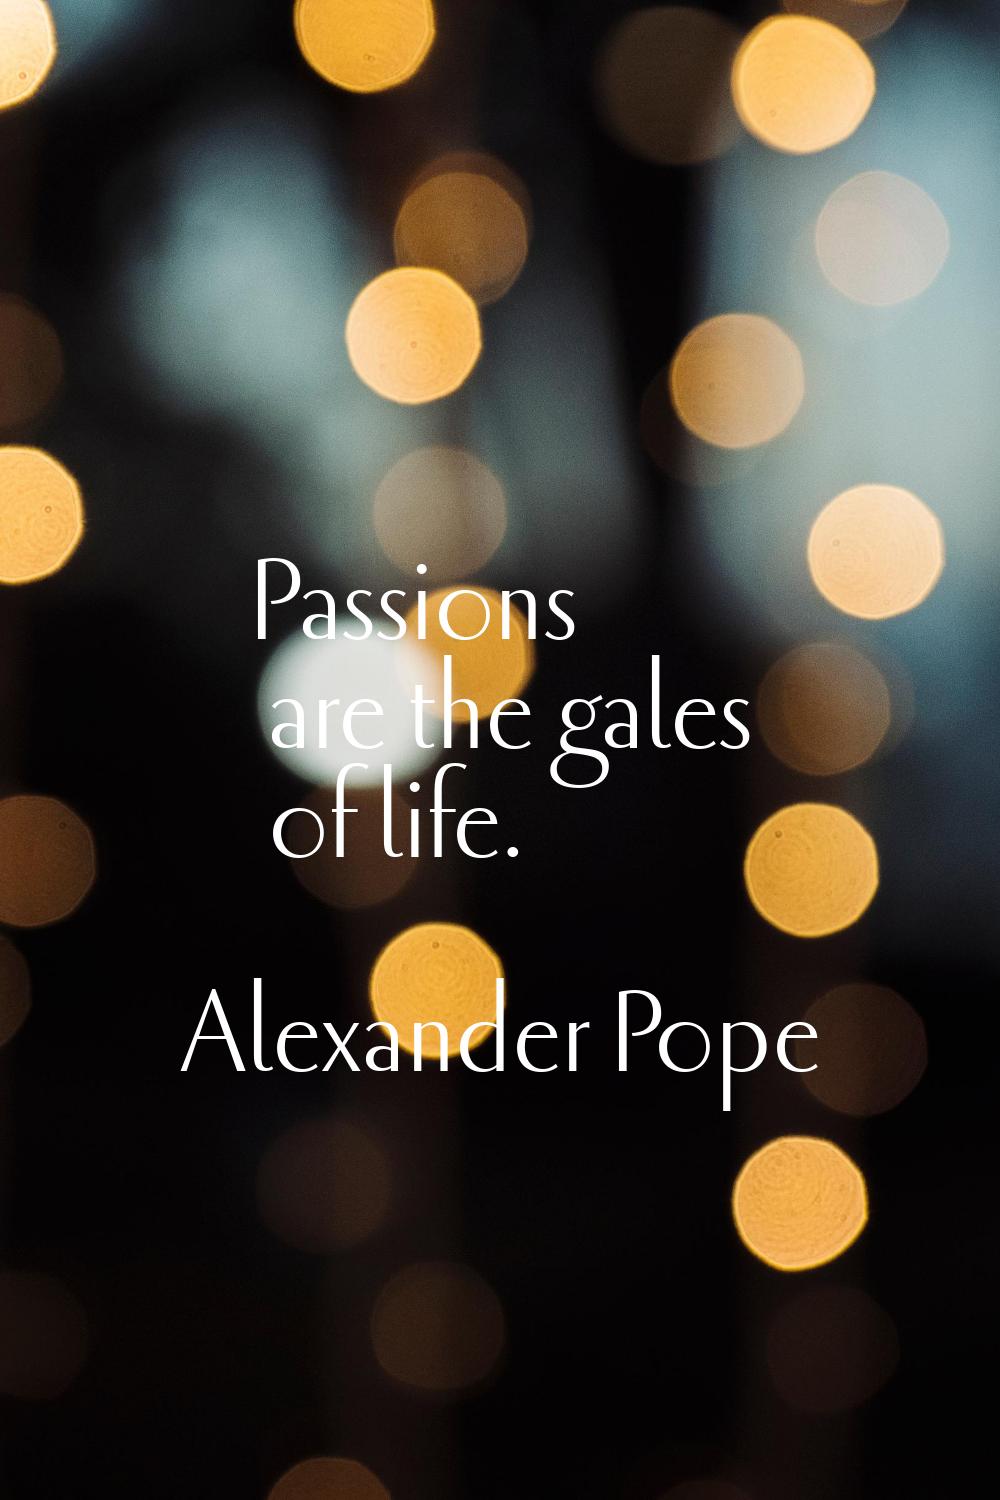 Passions are the gales of life.